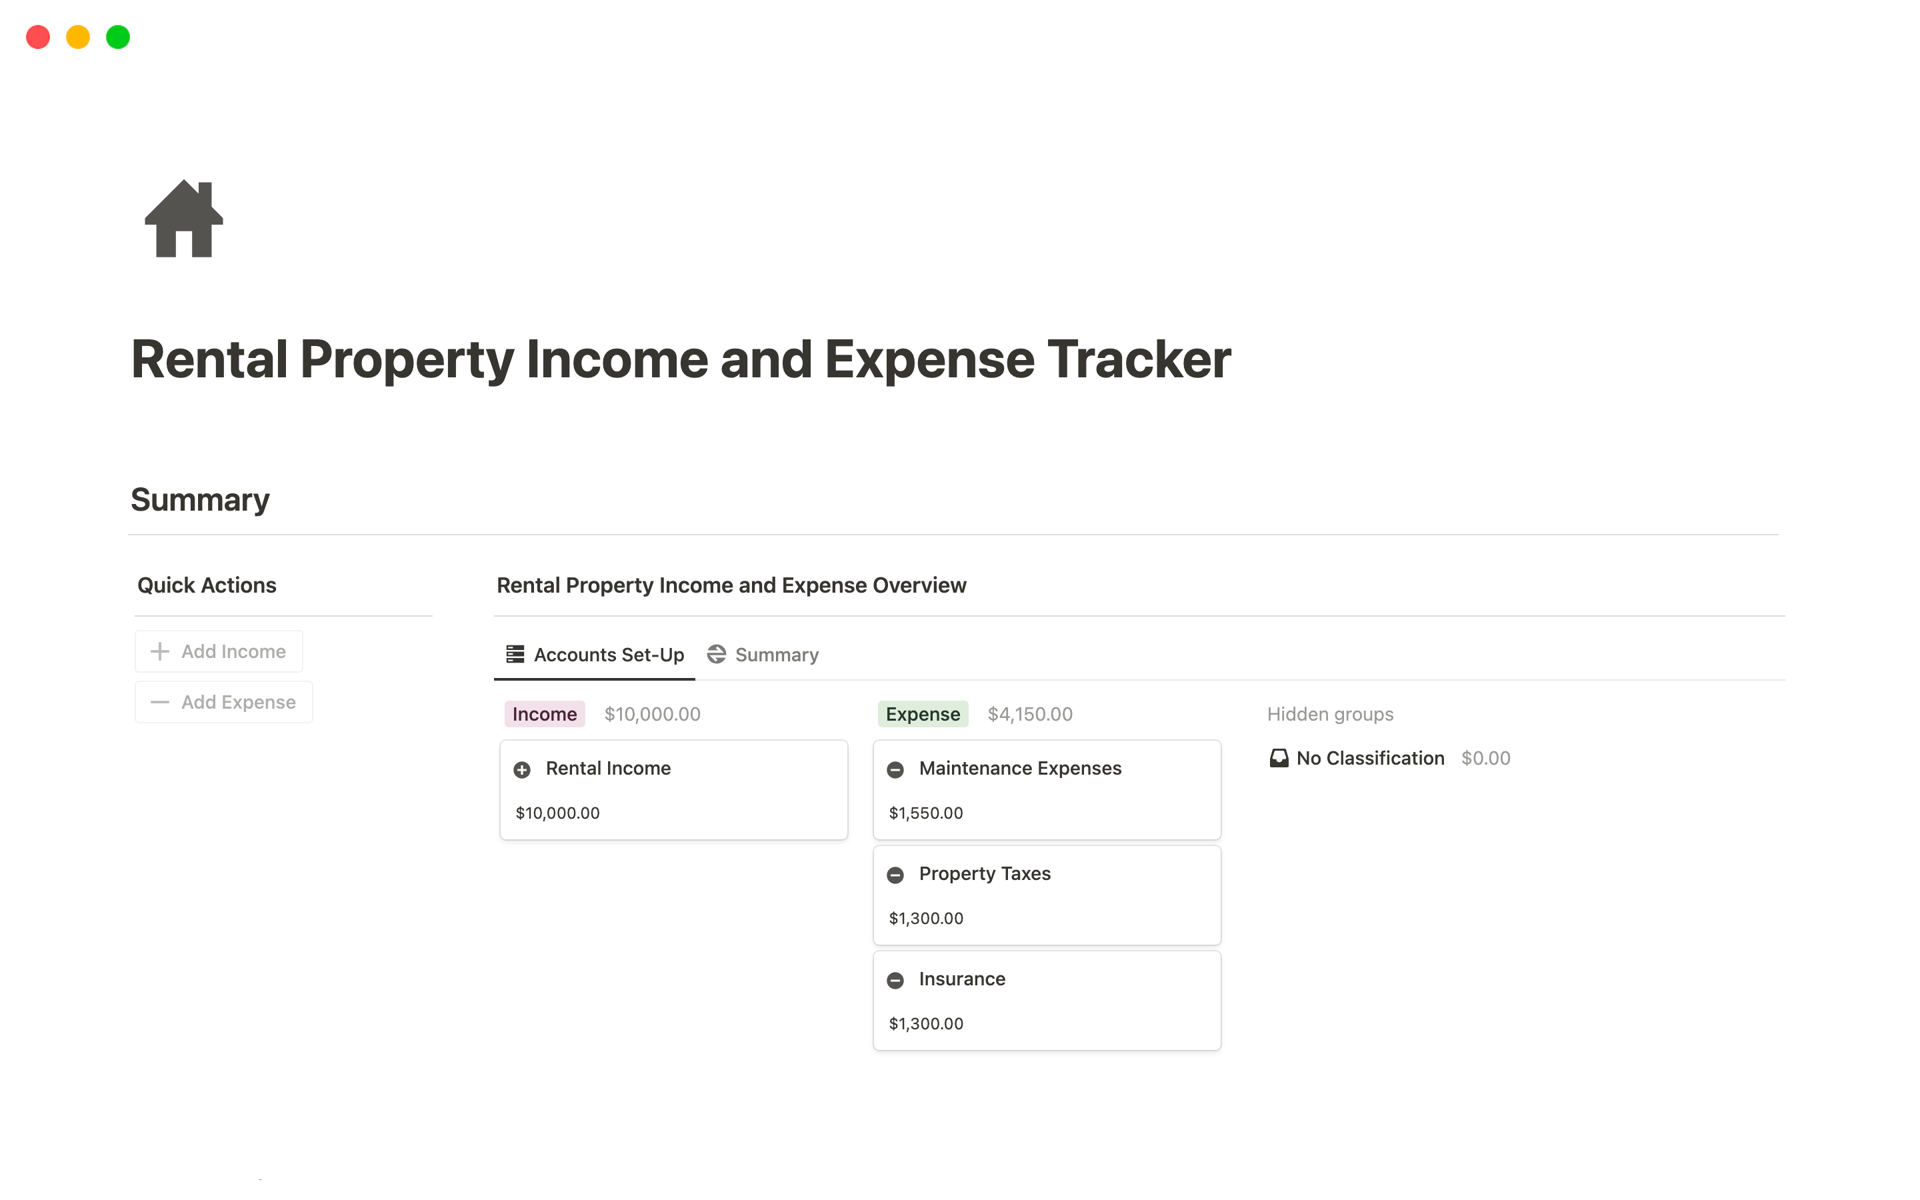 For landlords, it tracks rental income, property-related expenses, and maintenance costs for multiple rental properties.